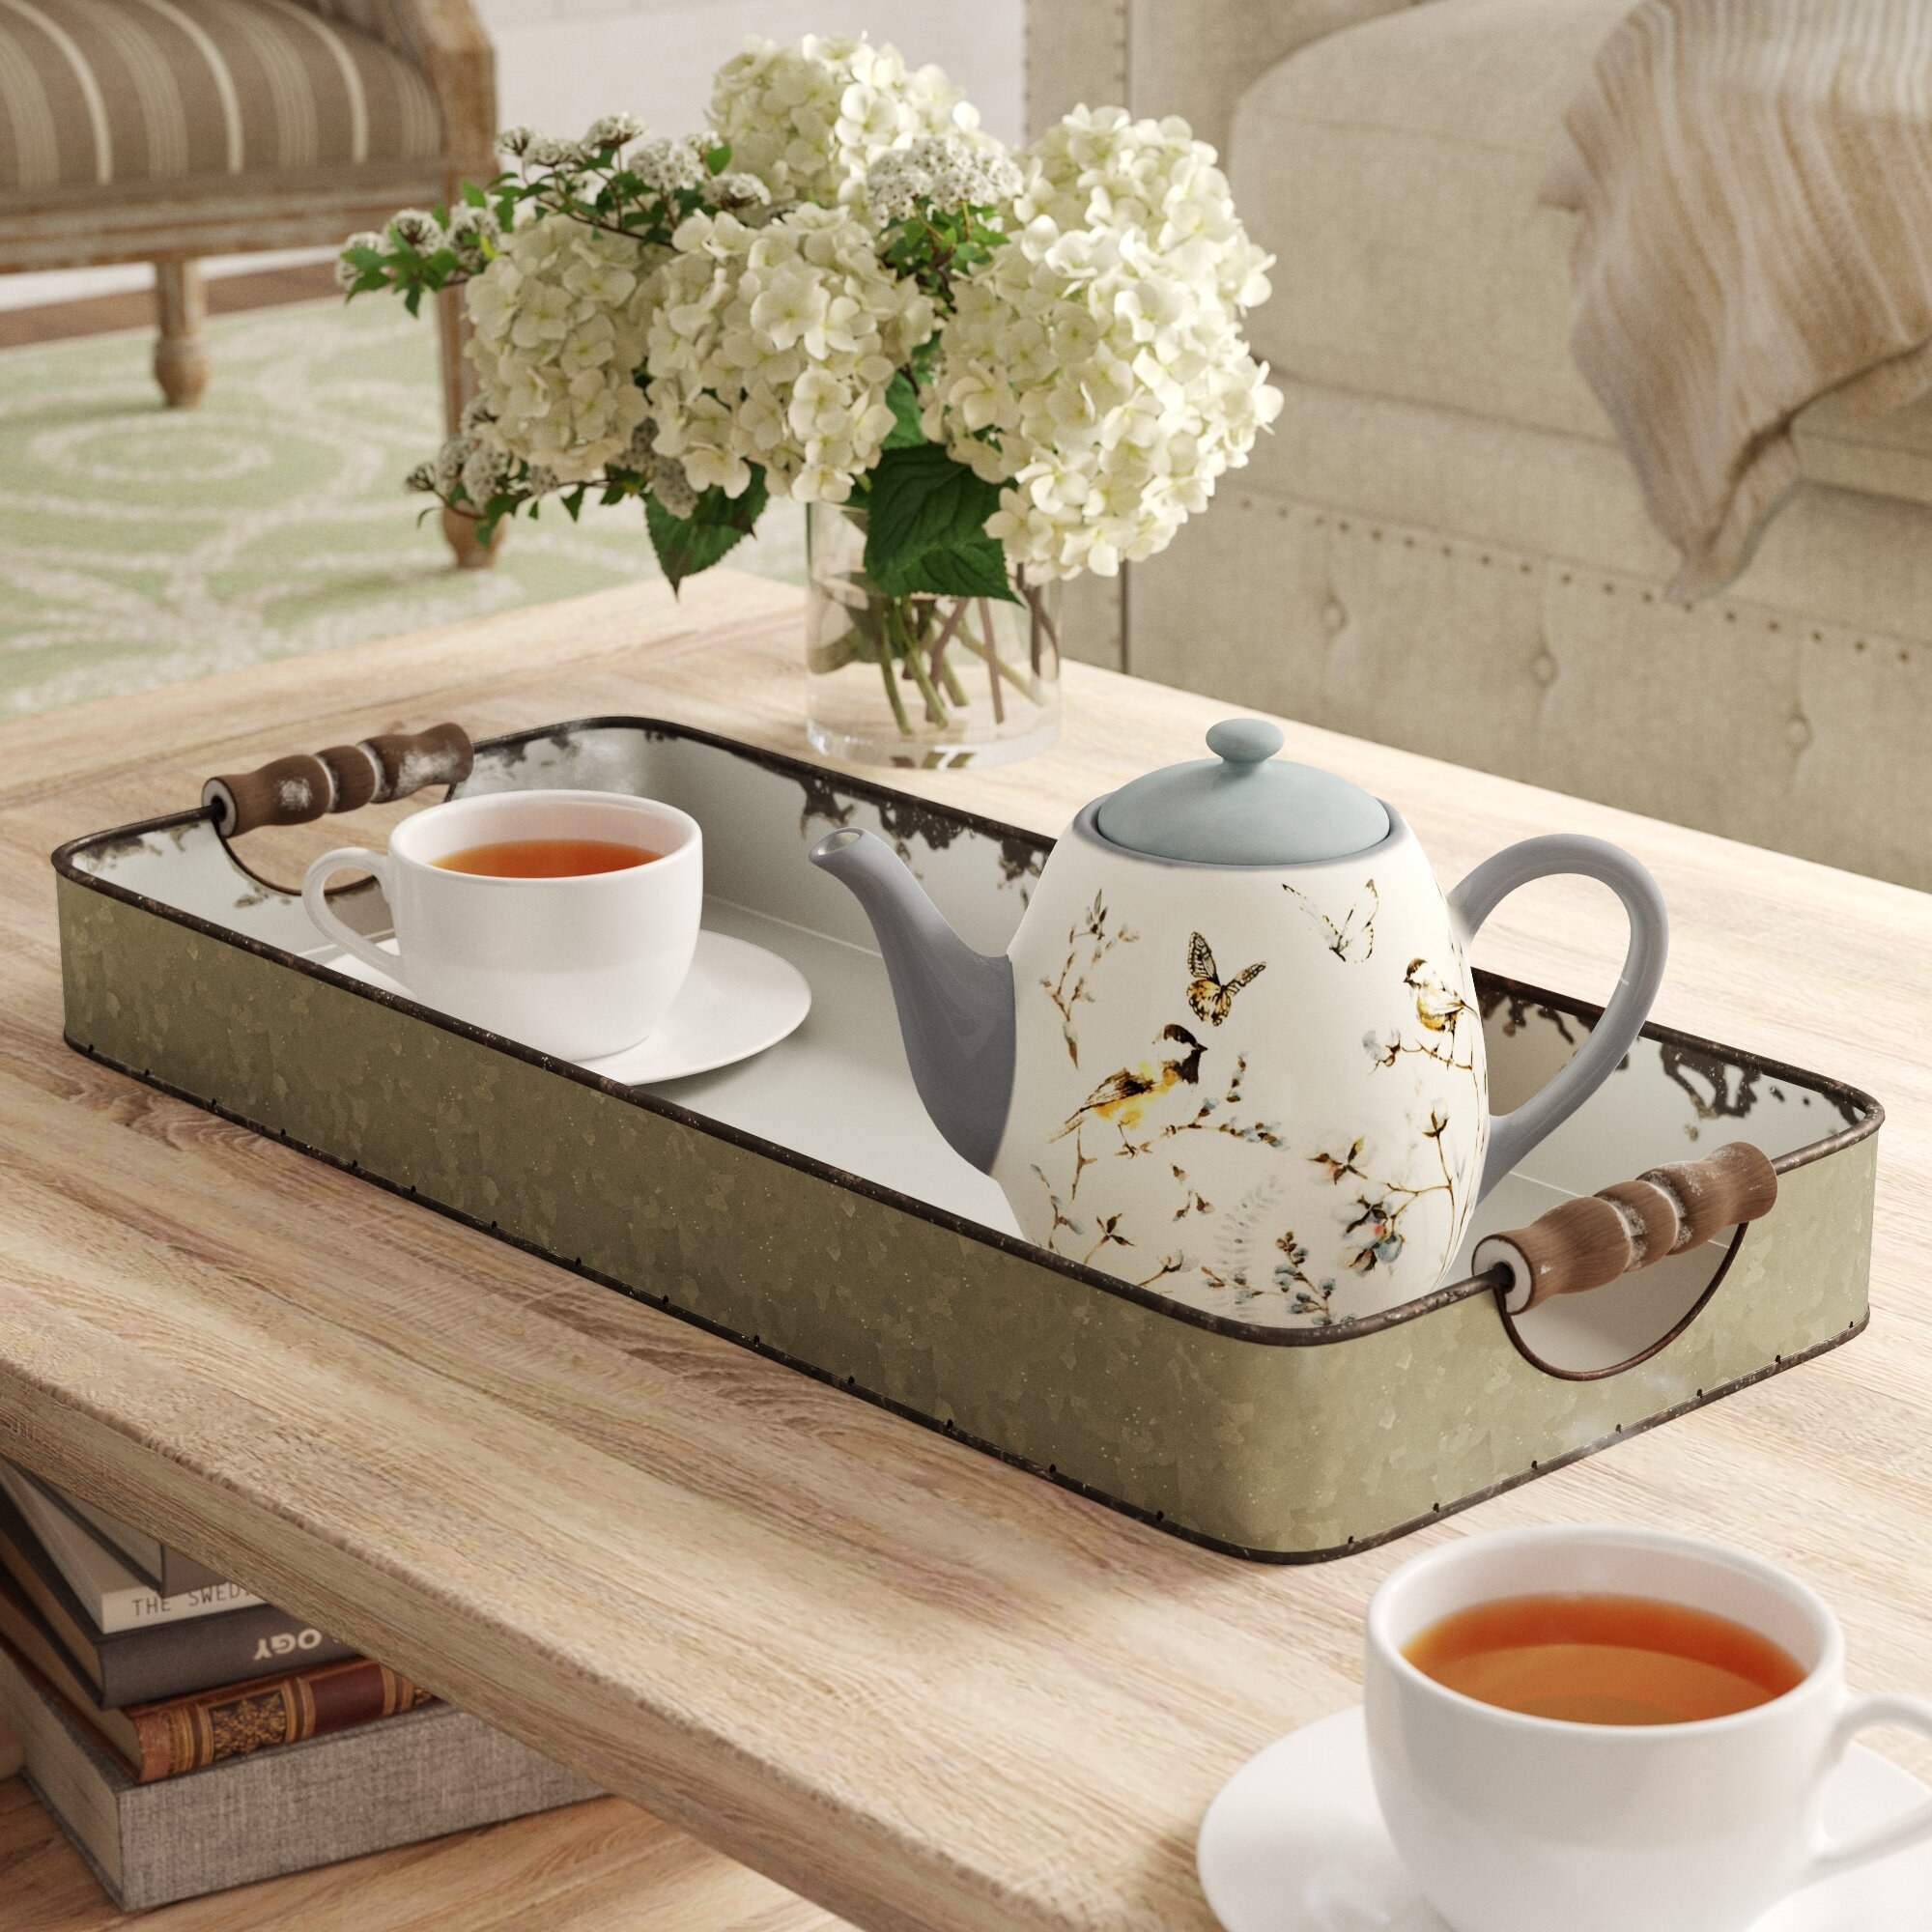 Coffee tray table with floral tea pot and cup of tea